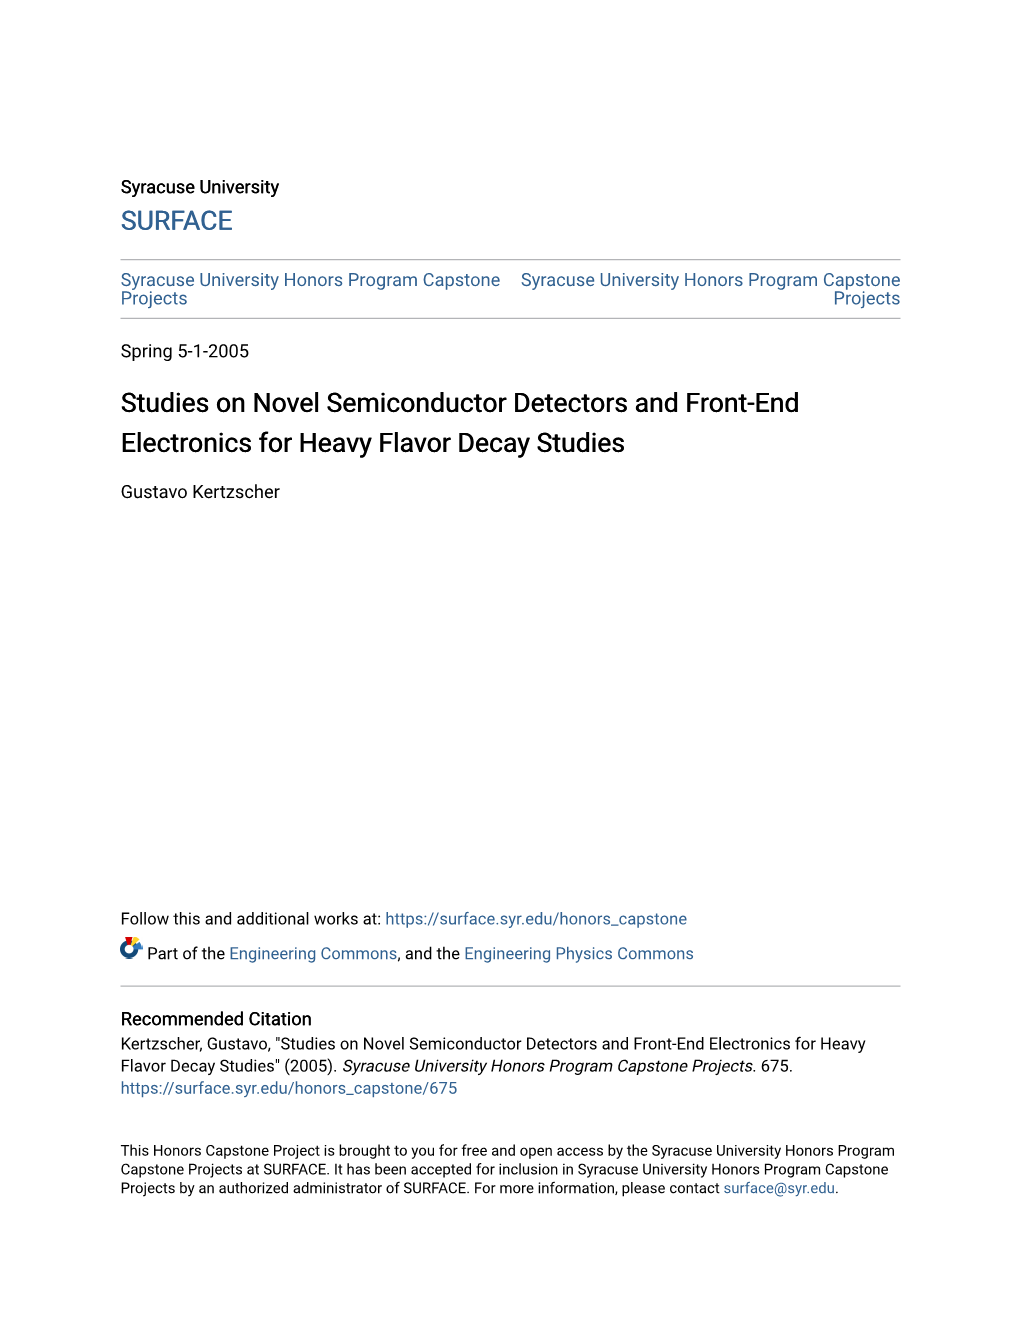 Studies on Novel Semiconductor Detectors and Front-End Electronics for Heavy Flavor Decay Studies